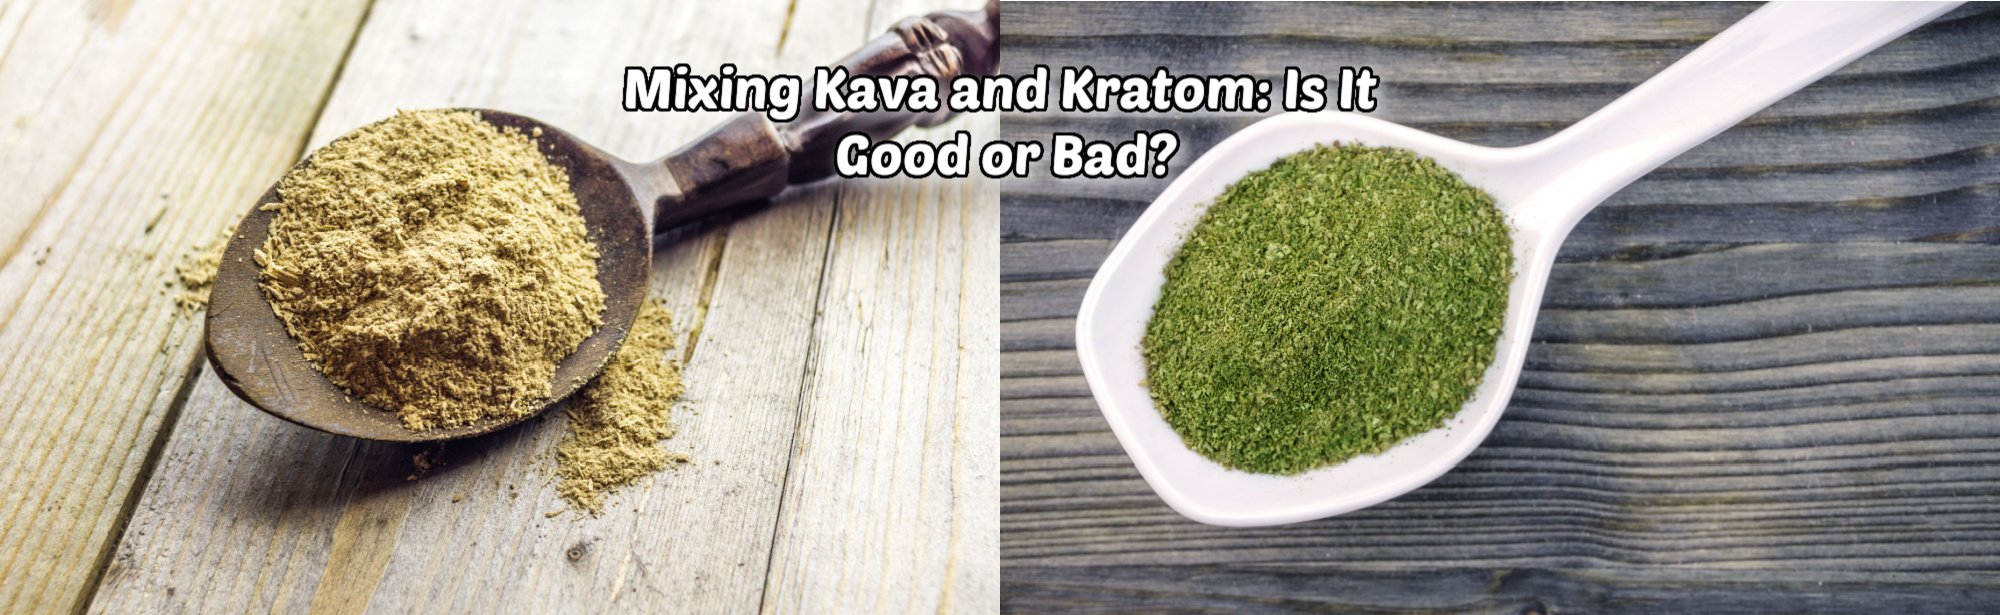 image of mixing kava and kratom 